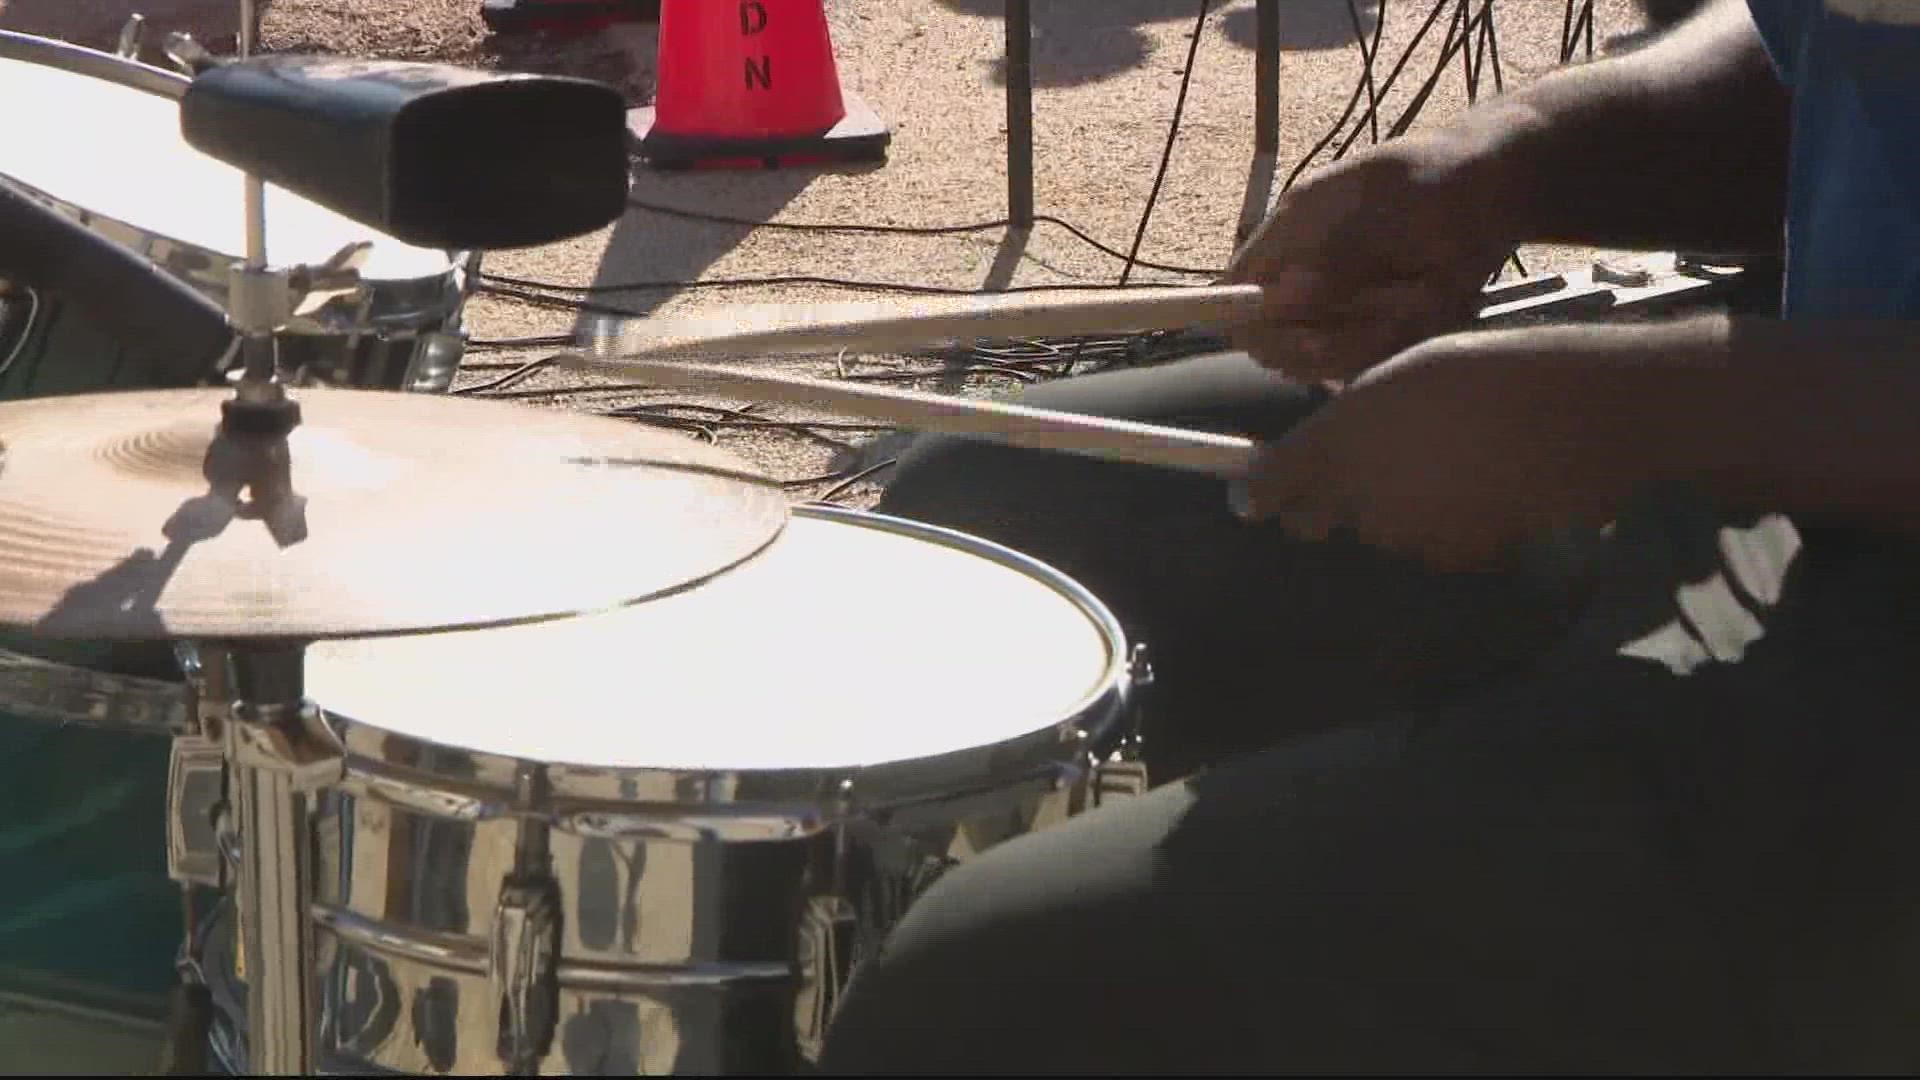 Over 70 local bands performed at Adams Morgan's PorchFest on Saturday.